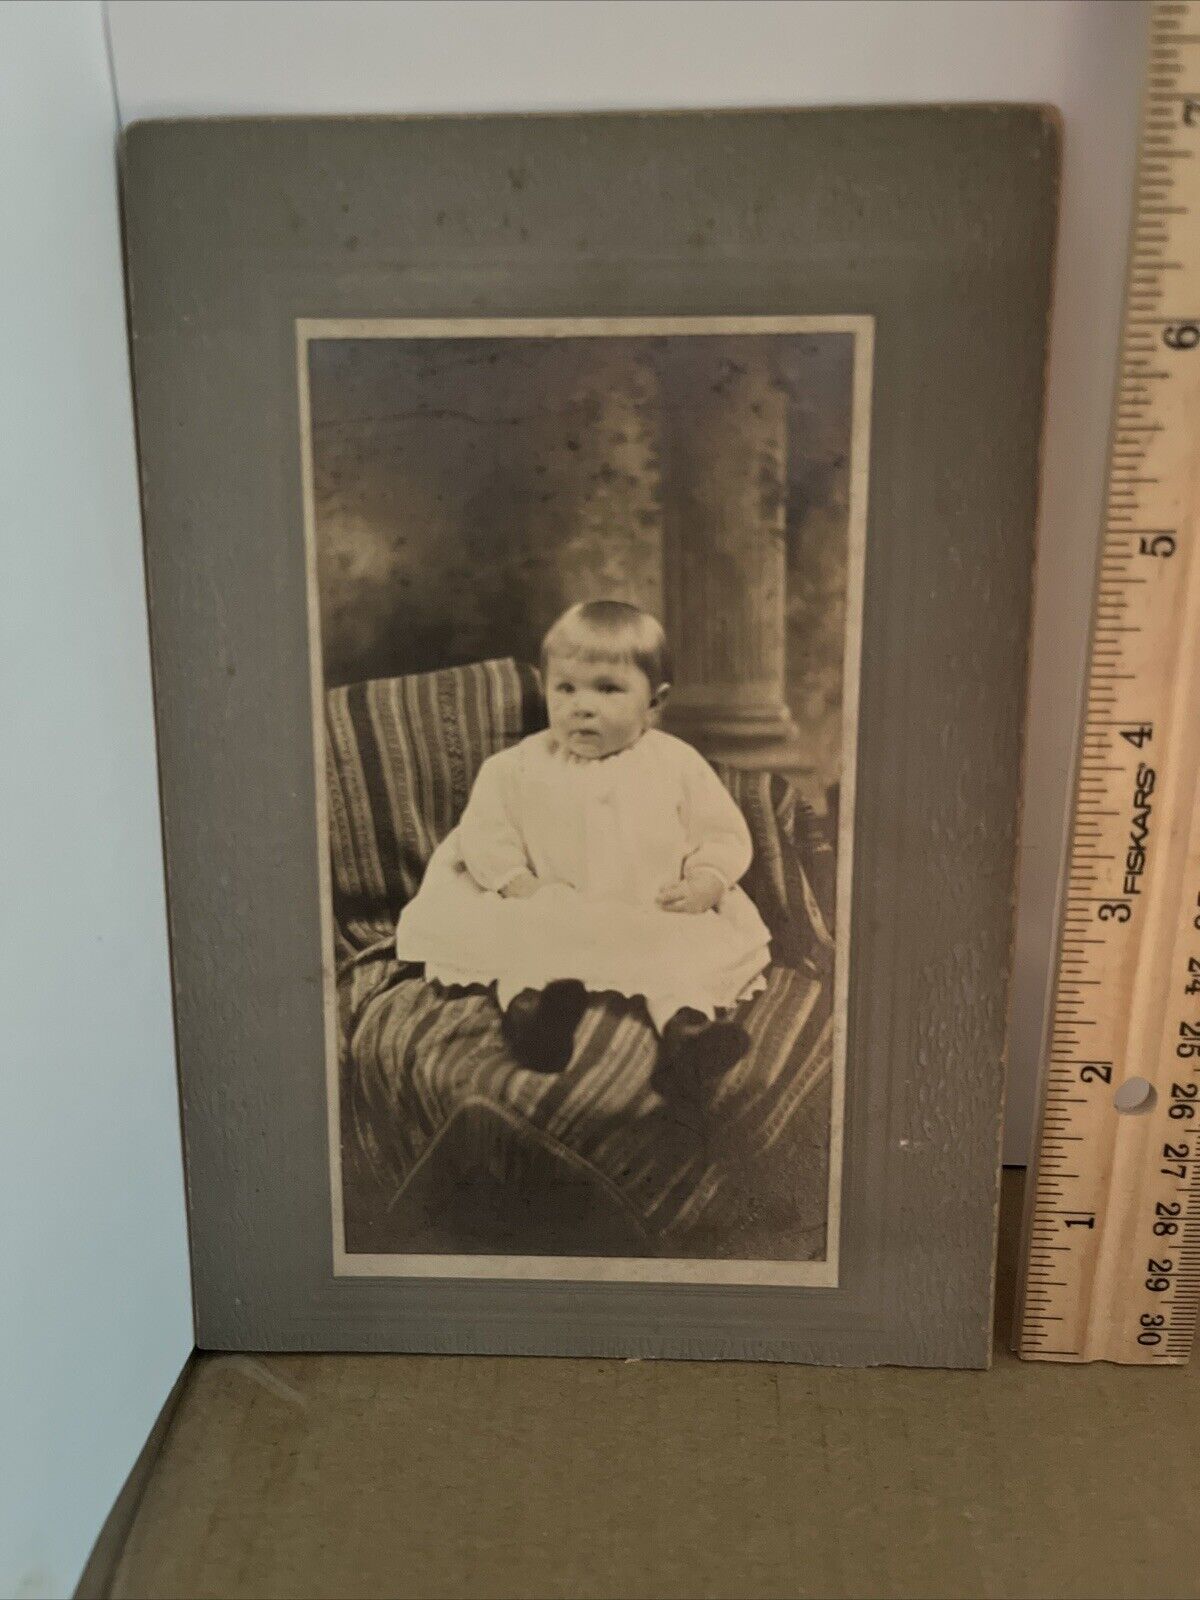 Baby Antique Original Sepia Photo of Adorable Baby Girl Matted 3” X 5.5” VTG